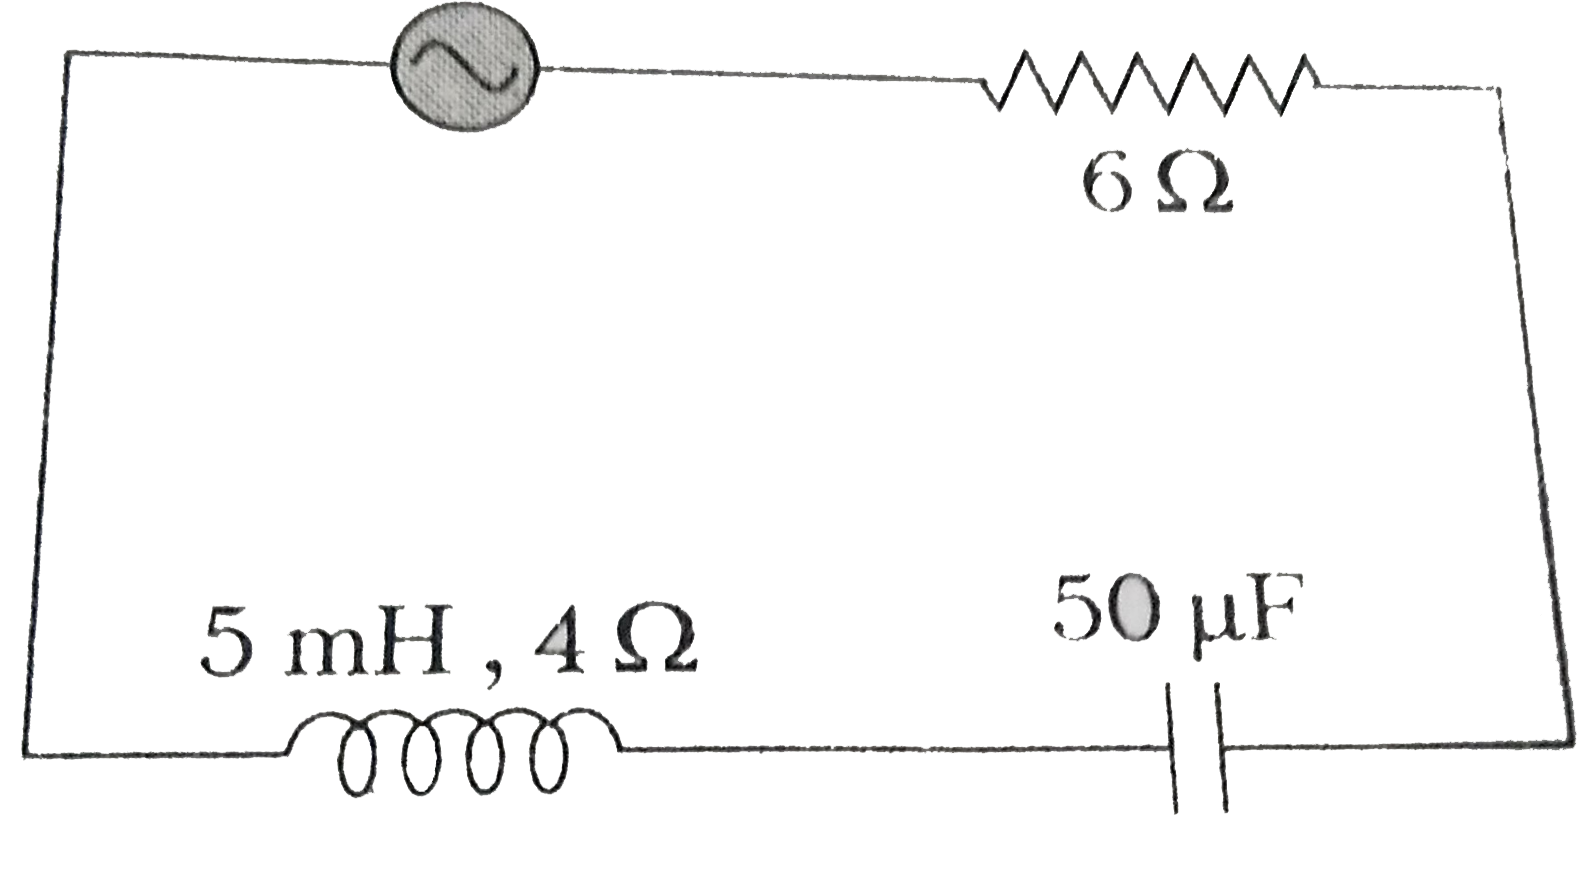 In the circuit shown, the AC source has voltage V = 20cos(omegat)volt with omega = 200 rads^(-1) the amplitude of the current will be nearest to